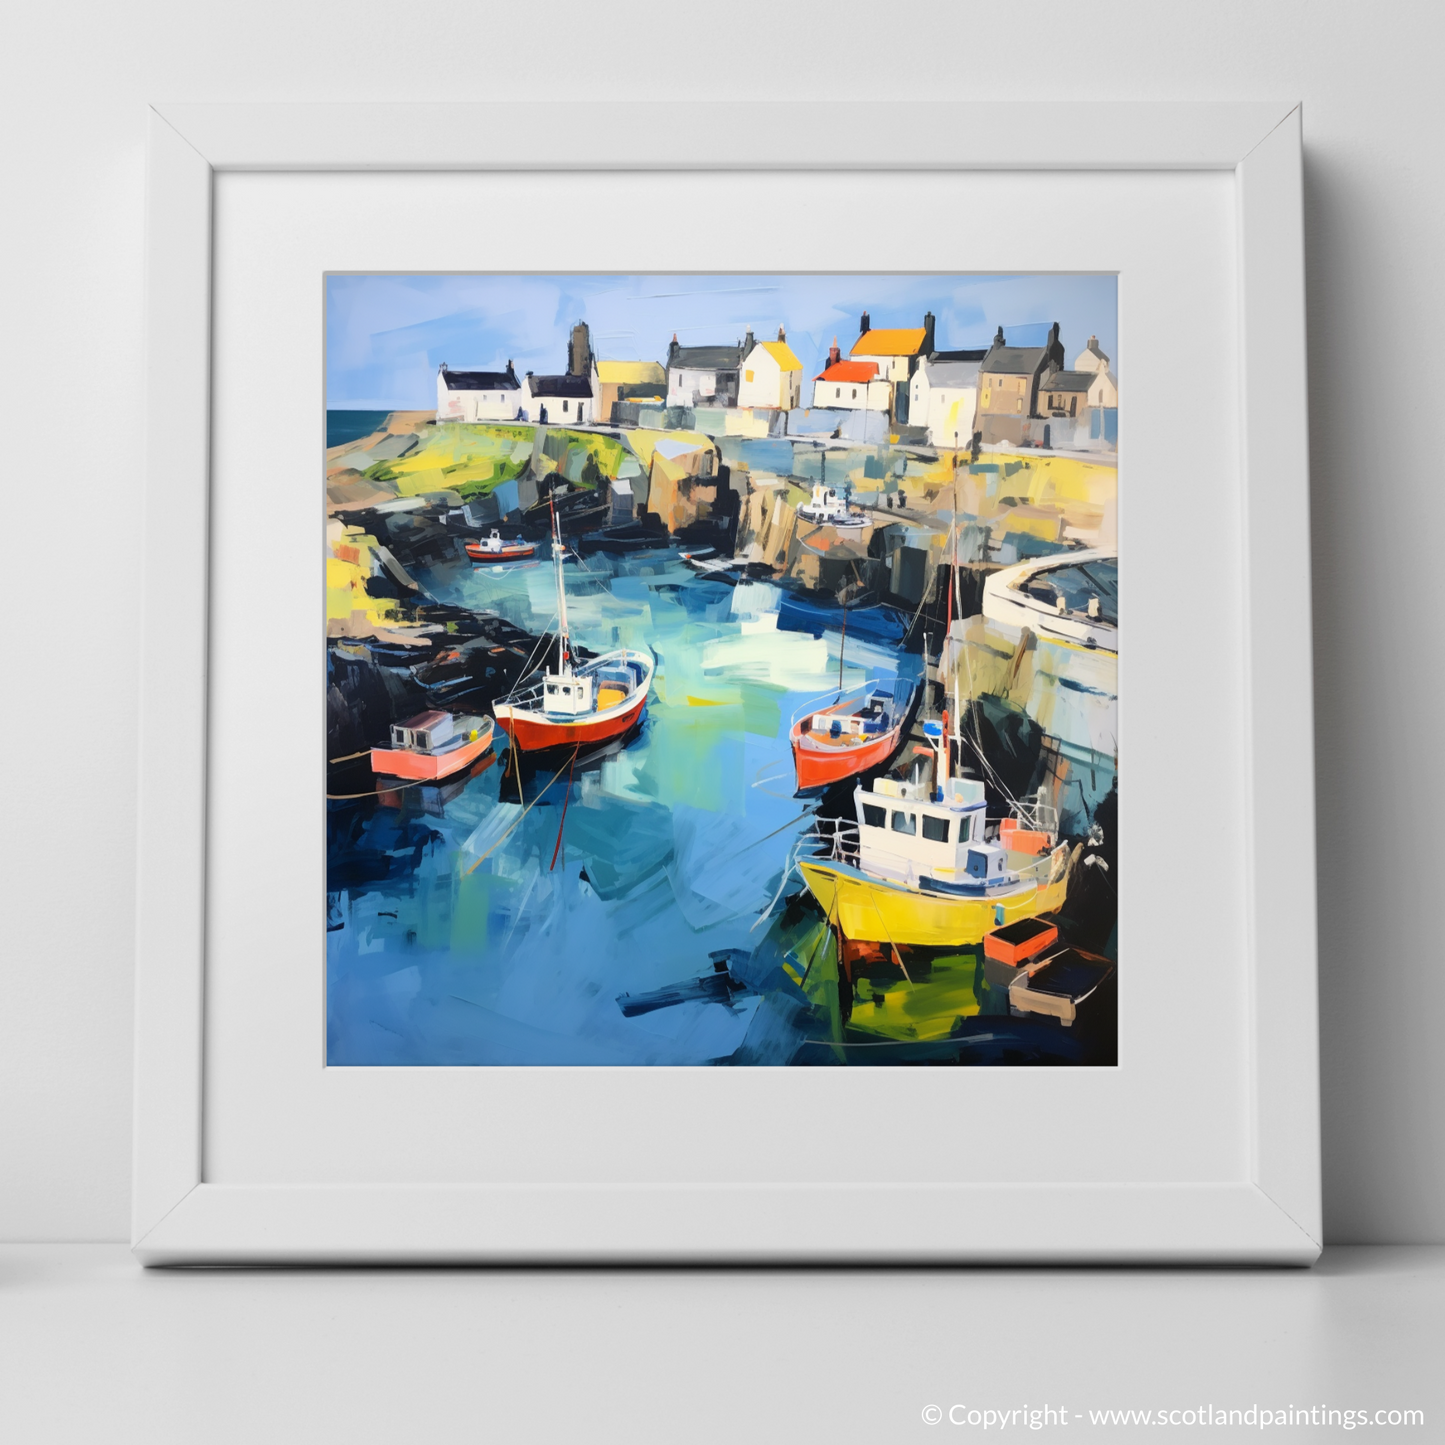 Portpatrick Harbour Odyssey: An Abstract Maritime Symphony